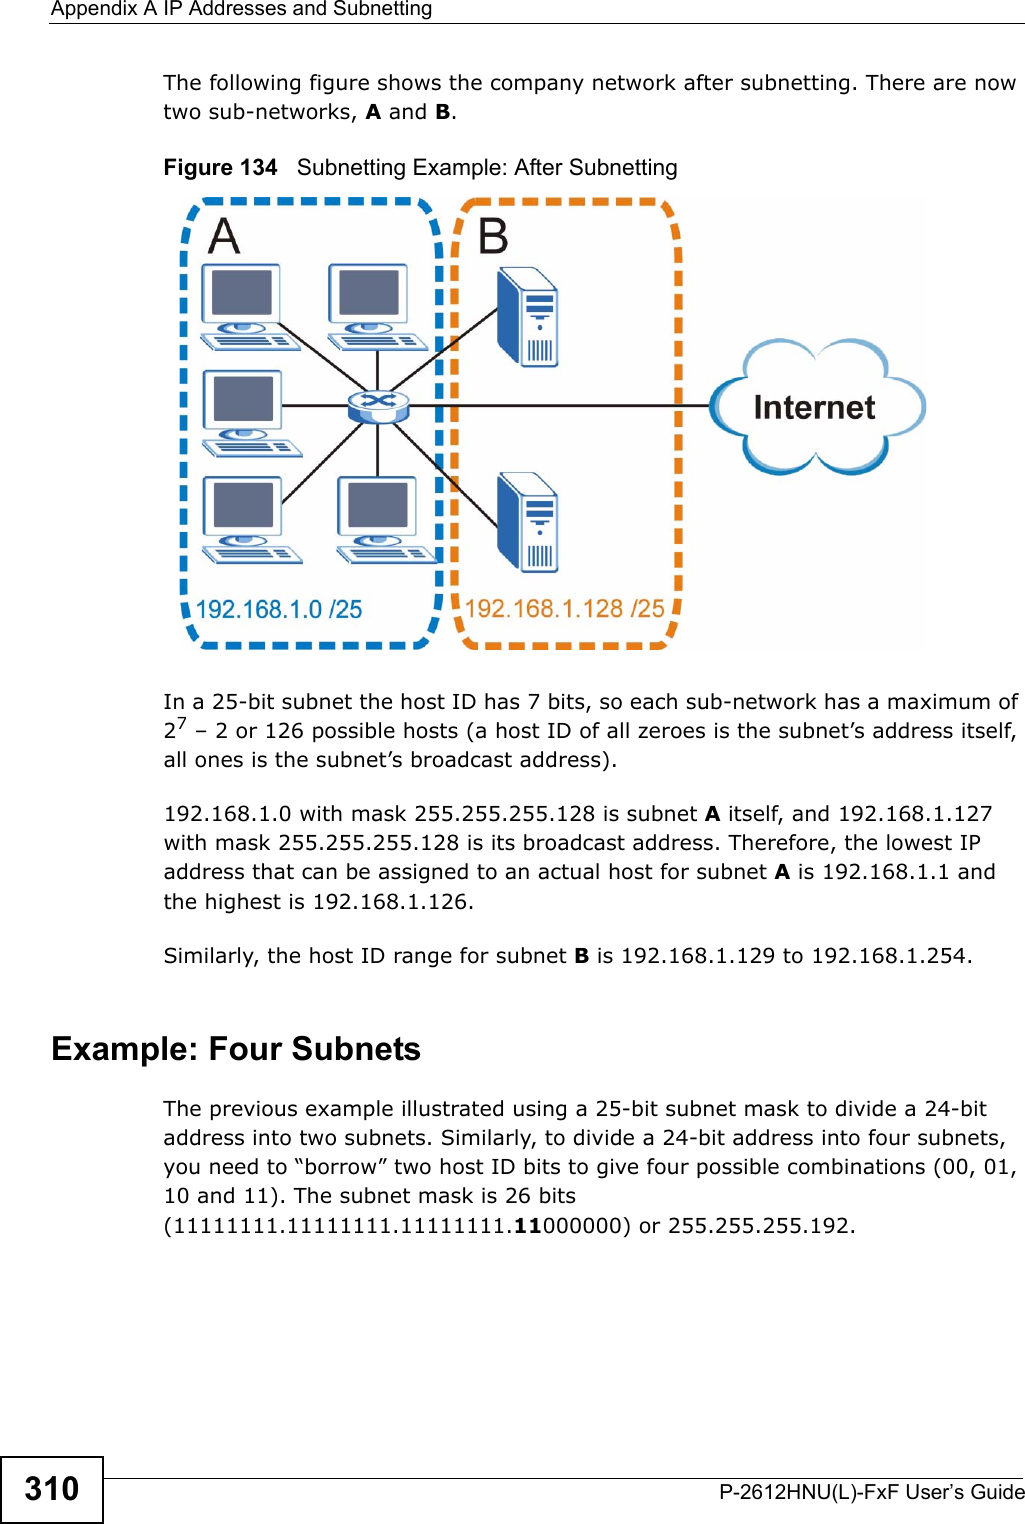 Appendix A IP Addresses and SubnettingP-2612HNU(L)-FxF User’s Guide310The following figure shows the company network after subnetting. There are now two sub-networks, A and B. Figure 134   Subnetting Example: After SubnettingIn a 25-bit subnet the host ID has 7 bits, so each sub-network has a maximum of27– 2 or 126 possible hosts (a host ID of all zeroes is the subnet’s address itself, all ones is the subnet’s broadcast address).192.168.1.0 with mask 255.255.255.128 is subnet A itself, and 192.168.1.127with mask 255.255.255.128 is its broadcast address. Therefore, the lowest IP address that can be assigned to an actual host for subnet A is 192.168.1.1 and the highest is 192.168.1.126. Similarly, the host ID range for subnet B is 192.168.1.129 to 192.168.1.254.Example: Four SubnetsThe previous example illustrated using a 25-bit subnet mask to divide a 24-bitaddress into two subnets. Similarly, to divide a 24-bit address into four subnets,you need to “borrow” two host ID bits to give four possible combinations (00, 01,10 and 11). The subnet mask is 26 bits (11111111.11111111.11111111.11000000) or 255.255.255.192. 